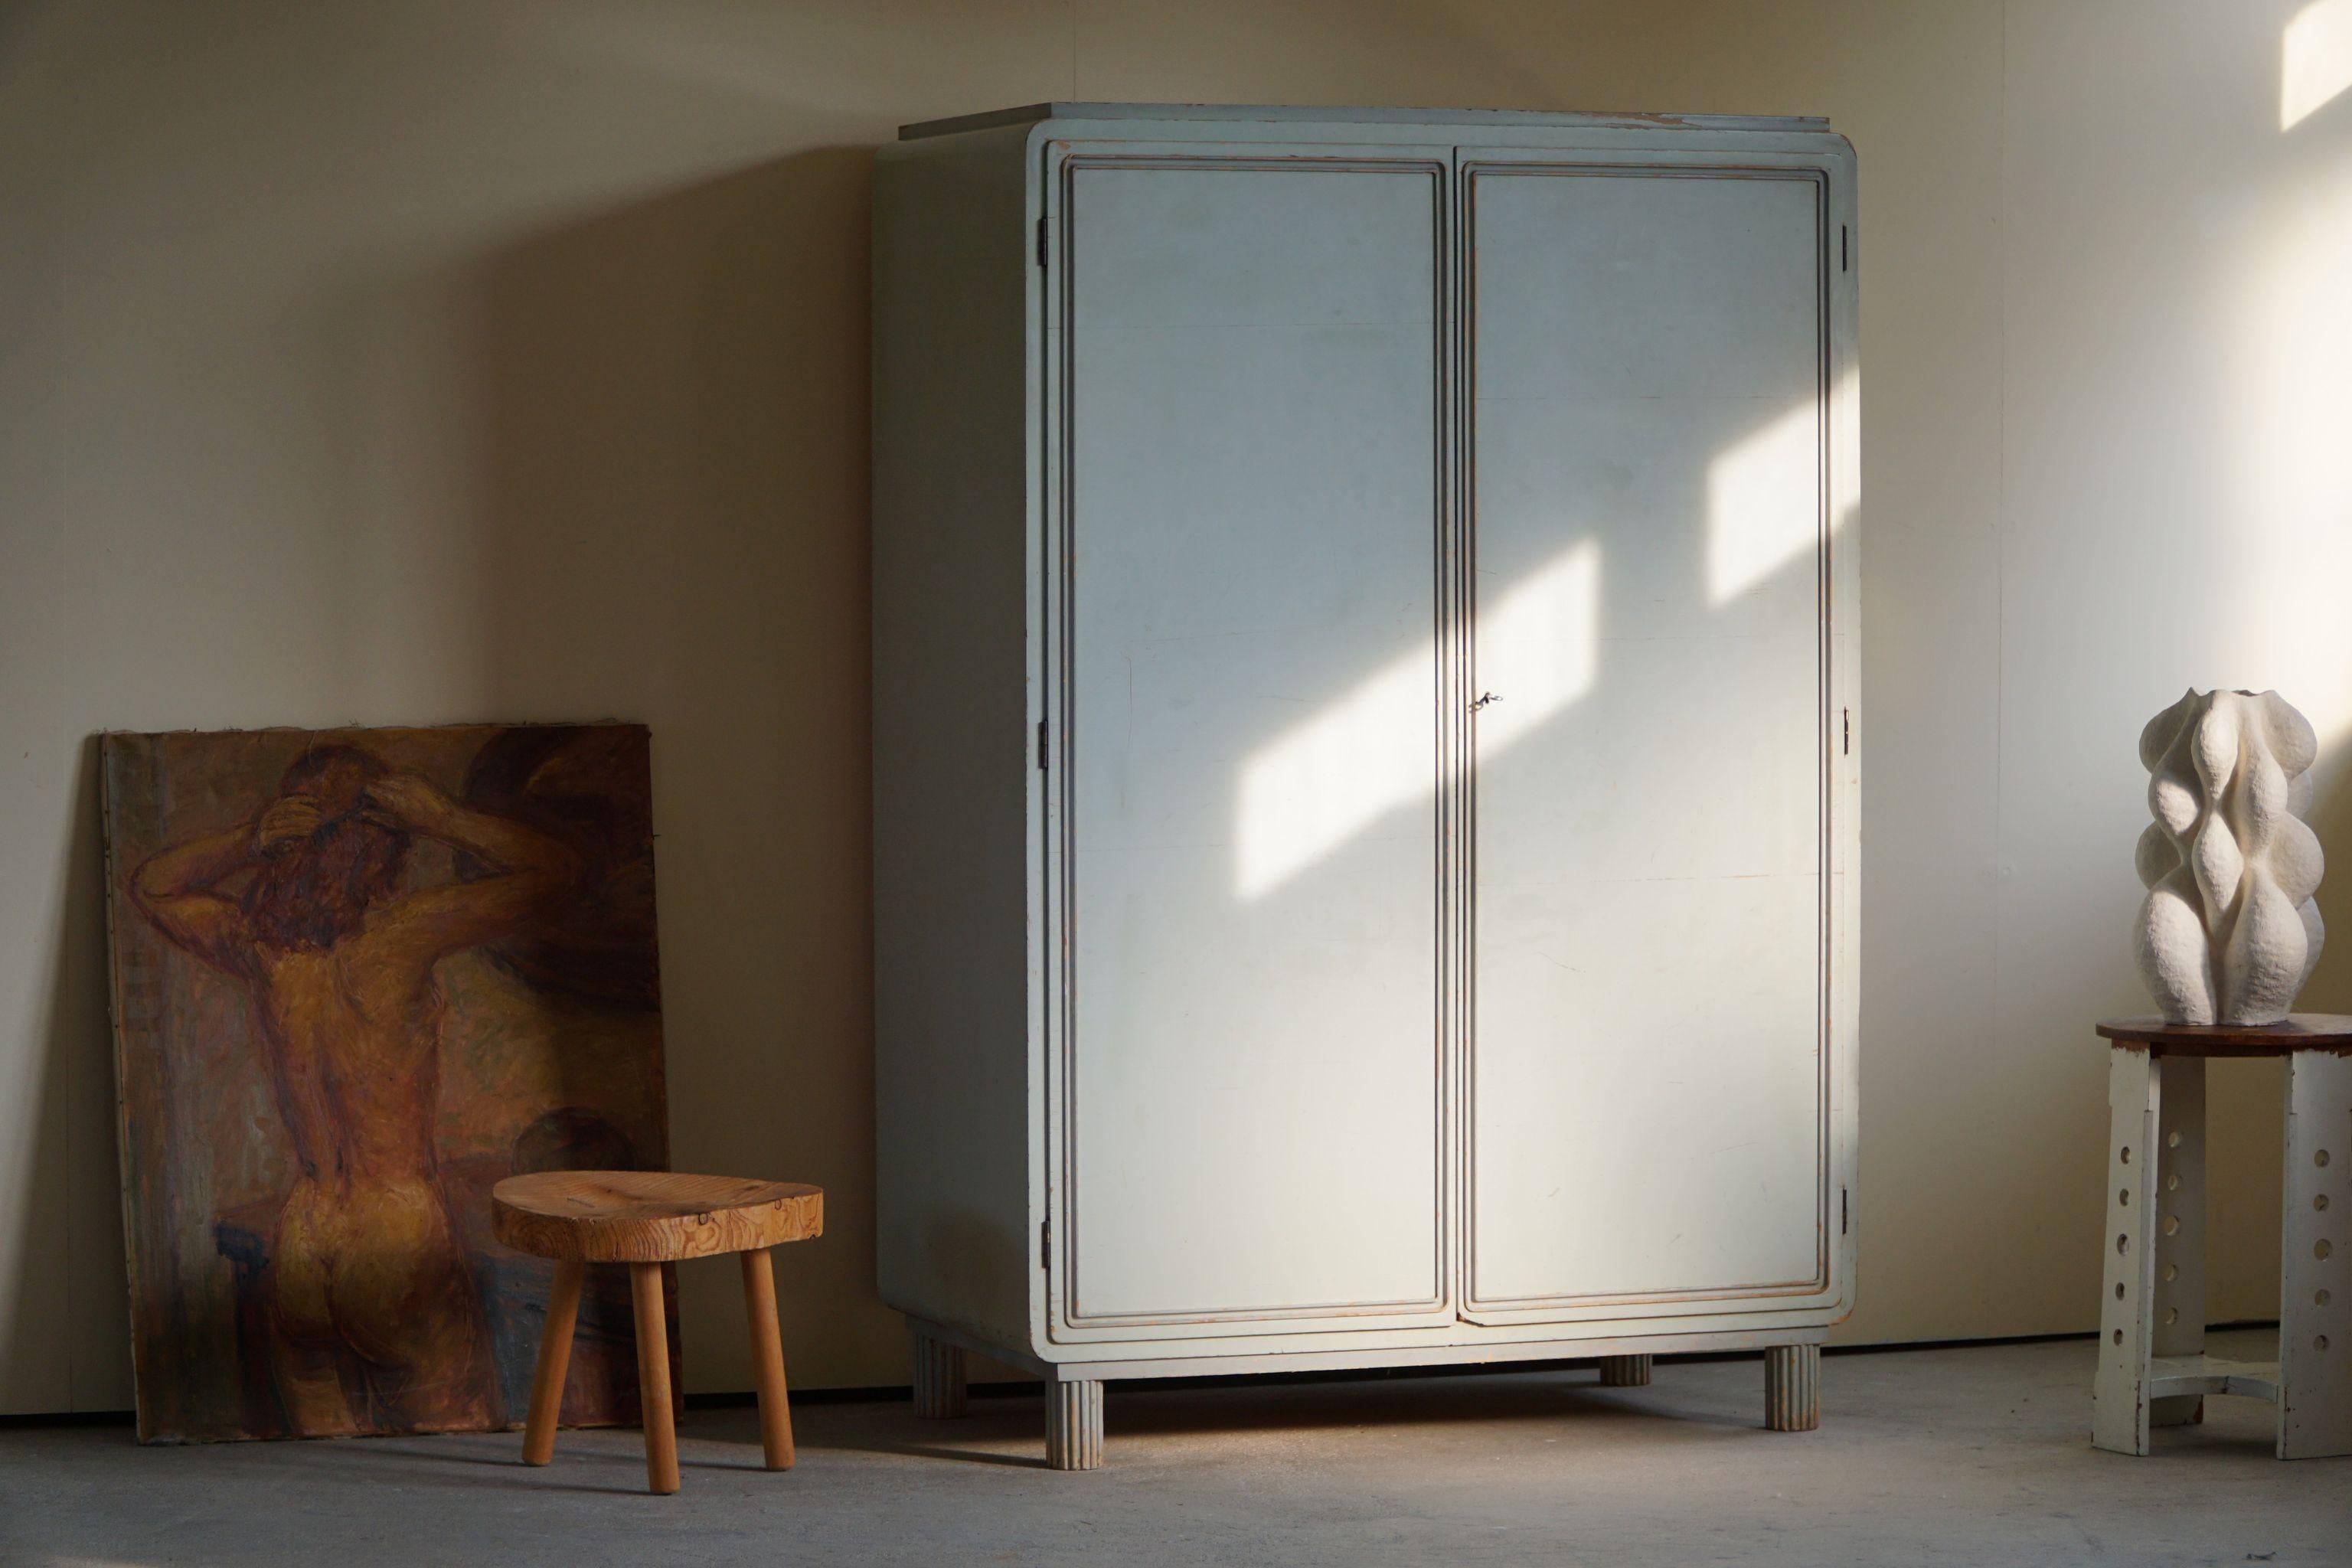 Very rare mint blue pastel painted Art Deco Cabinet in birch. Designed by Swedish Designer Axel Einar Hjorth, model 